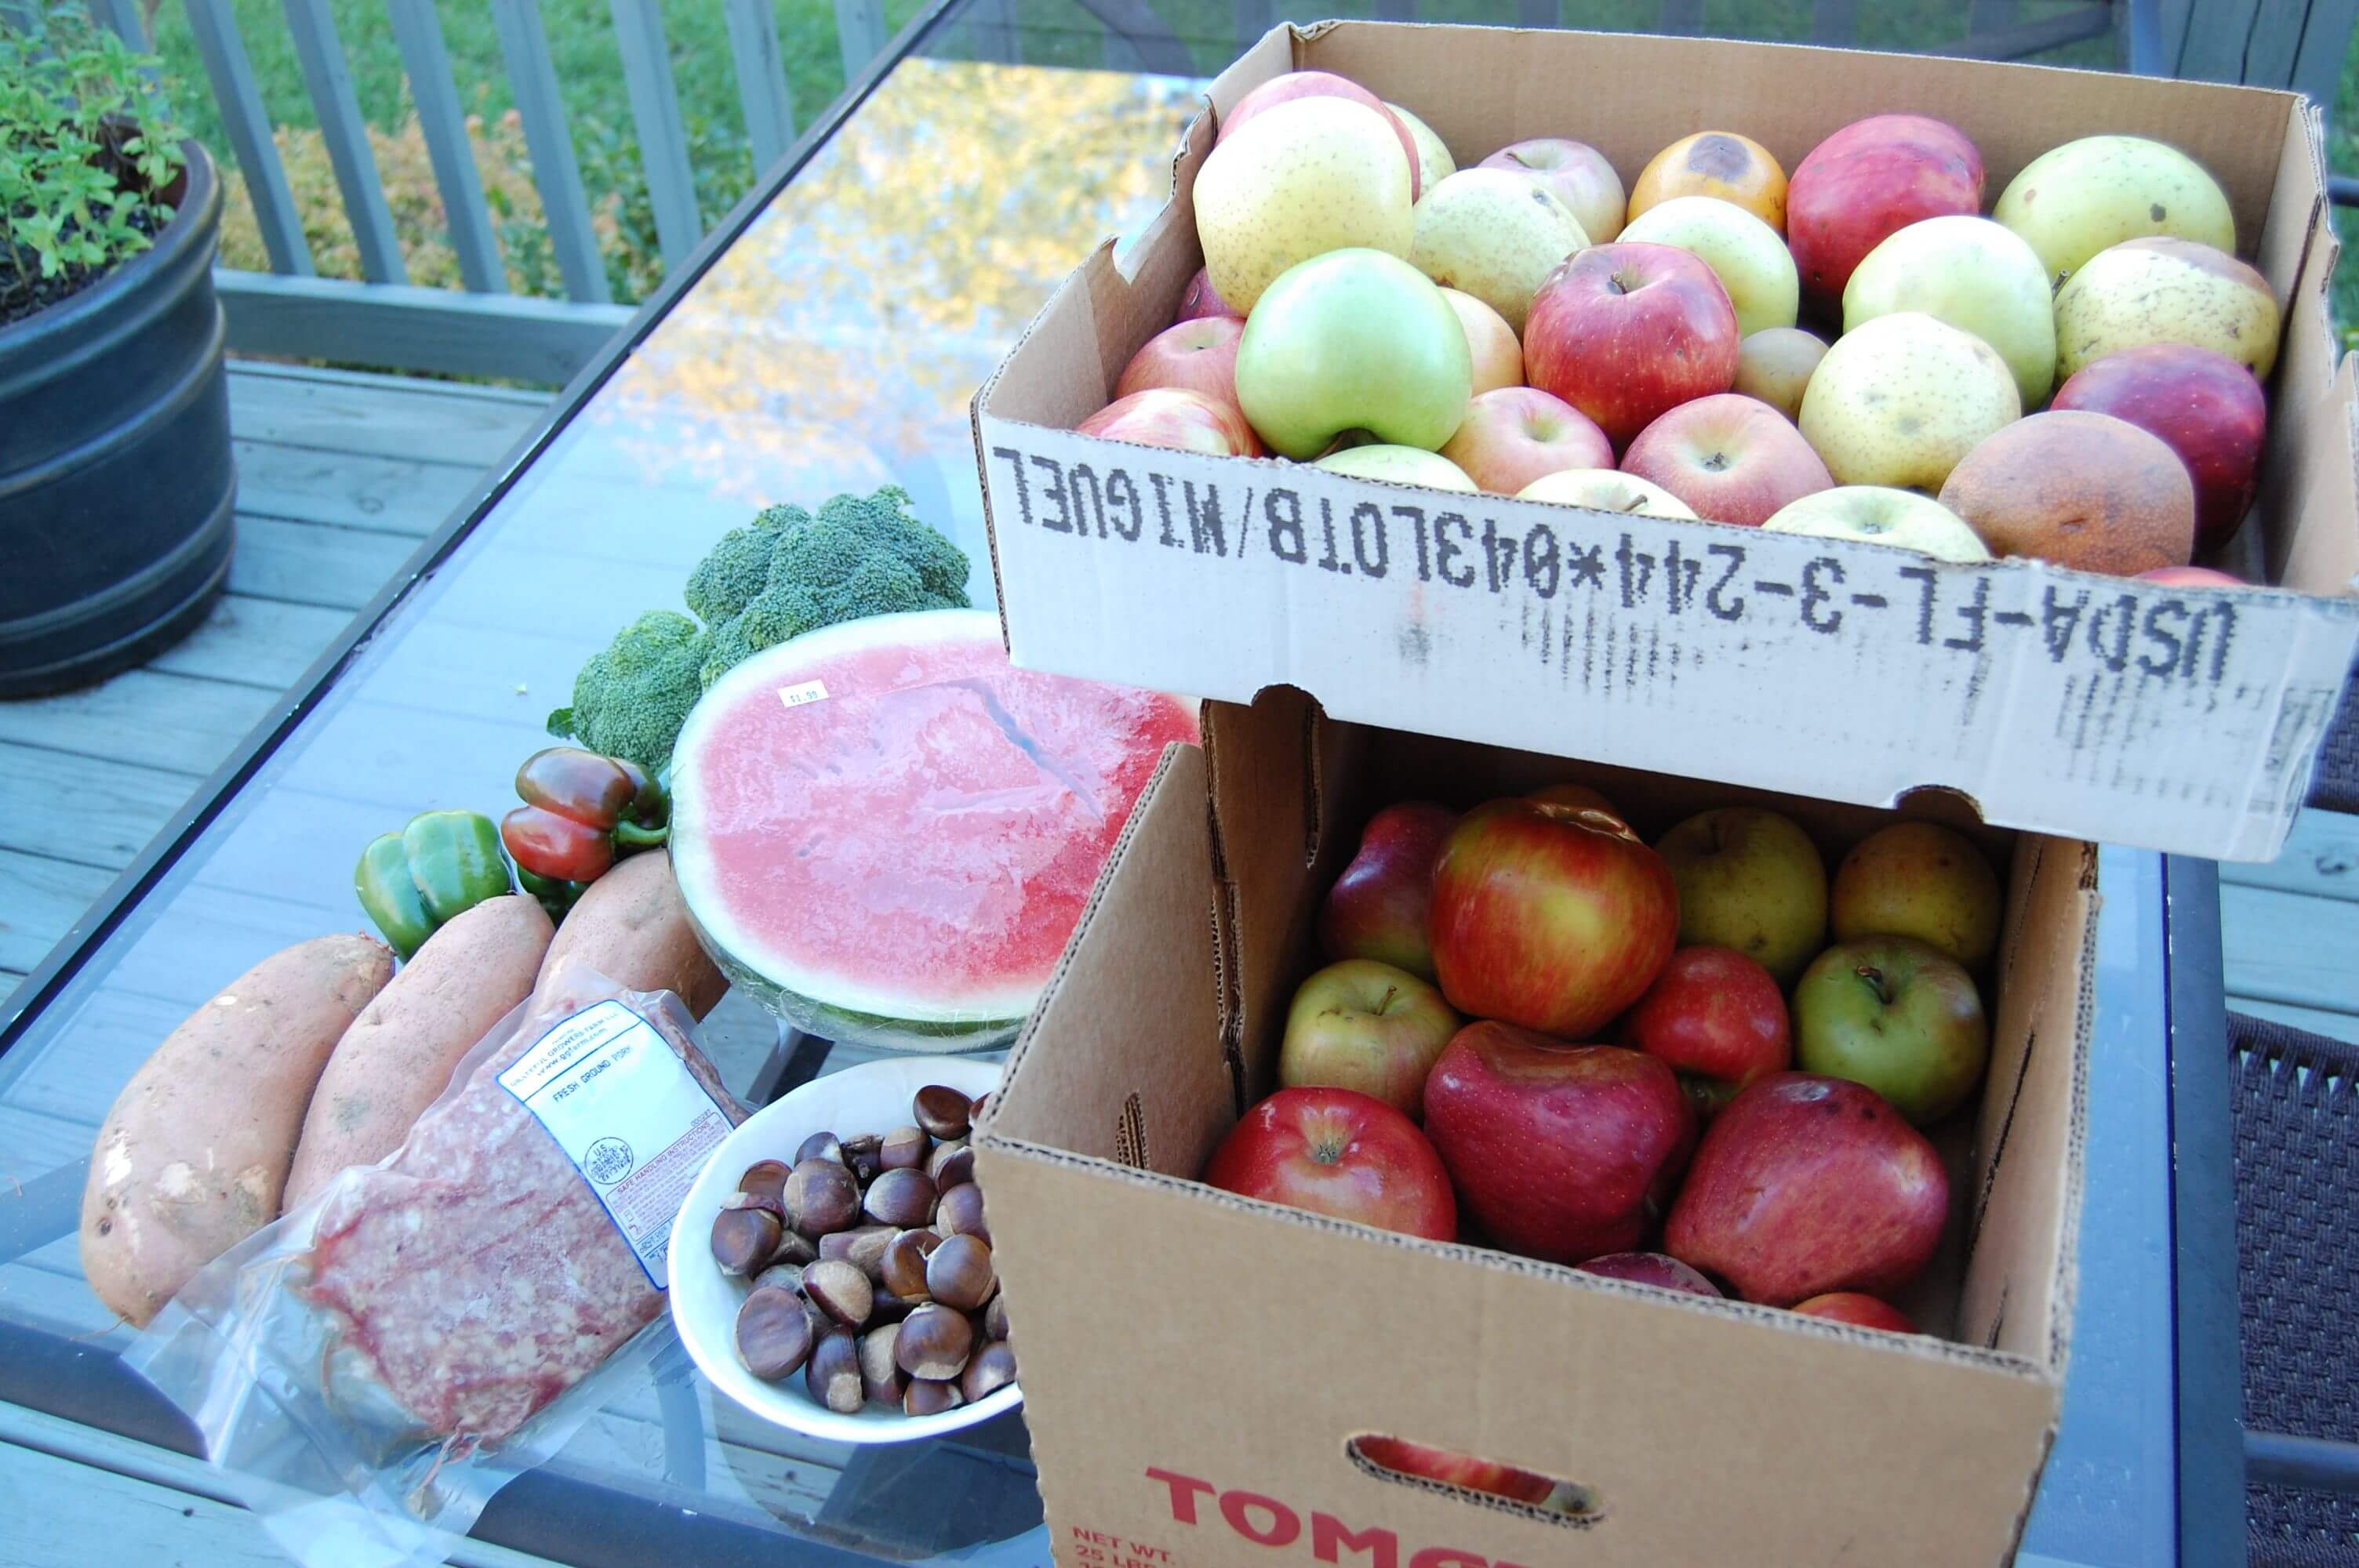 Boxes of apples, watermelon, sweet potatoes, broccoli, meat, and some nuts from the Hillbilly Produce in North Carolina. 